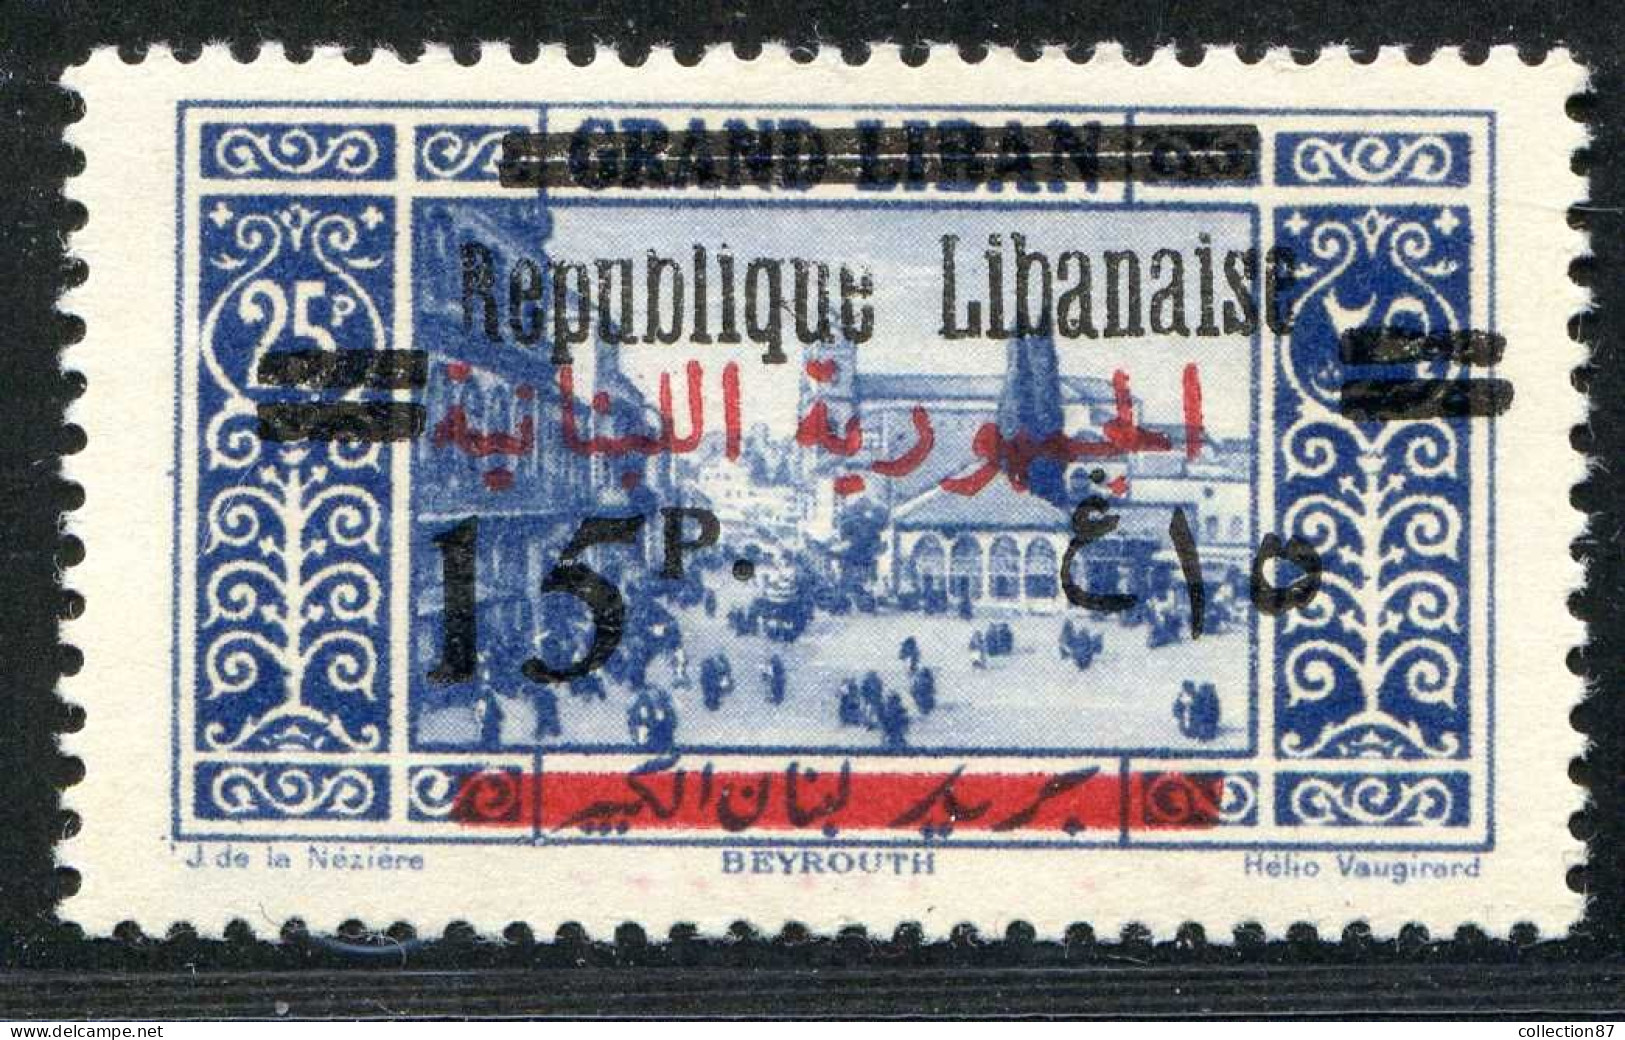 REF 089 > GRAND LIBAN < N° 109 * < Neuf Ch Dos Visible - MH * - Nuovi